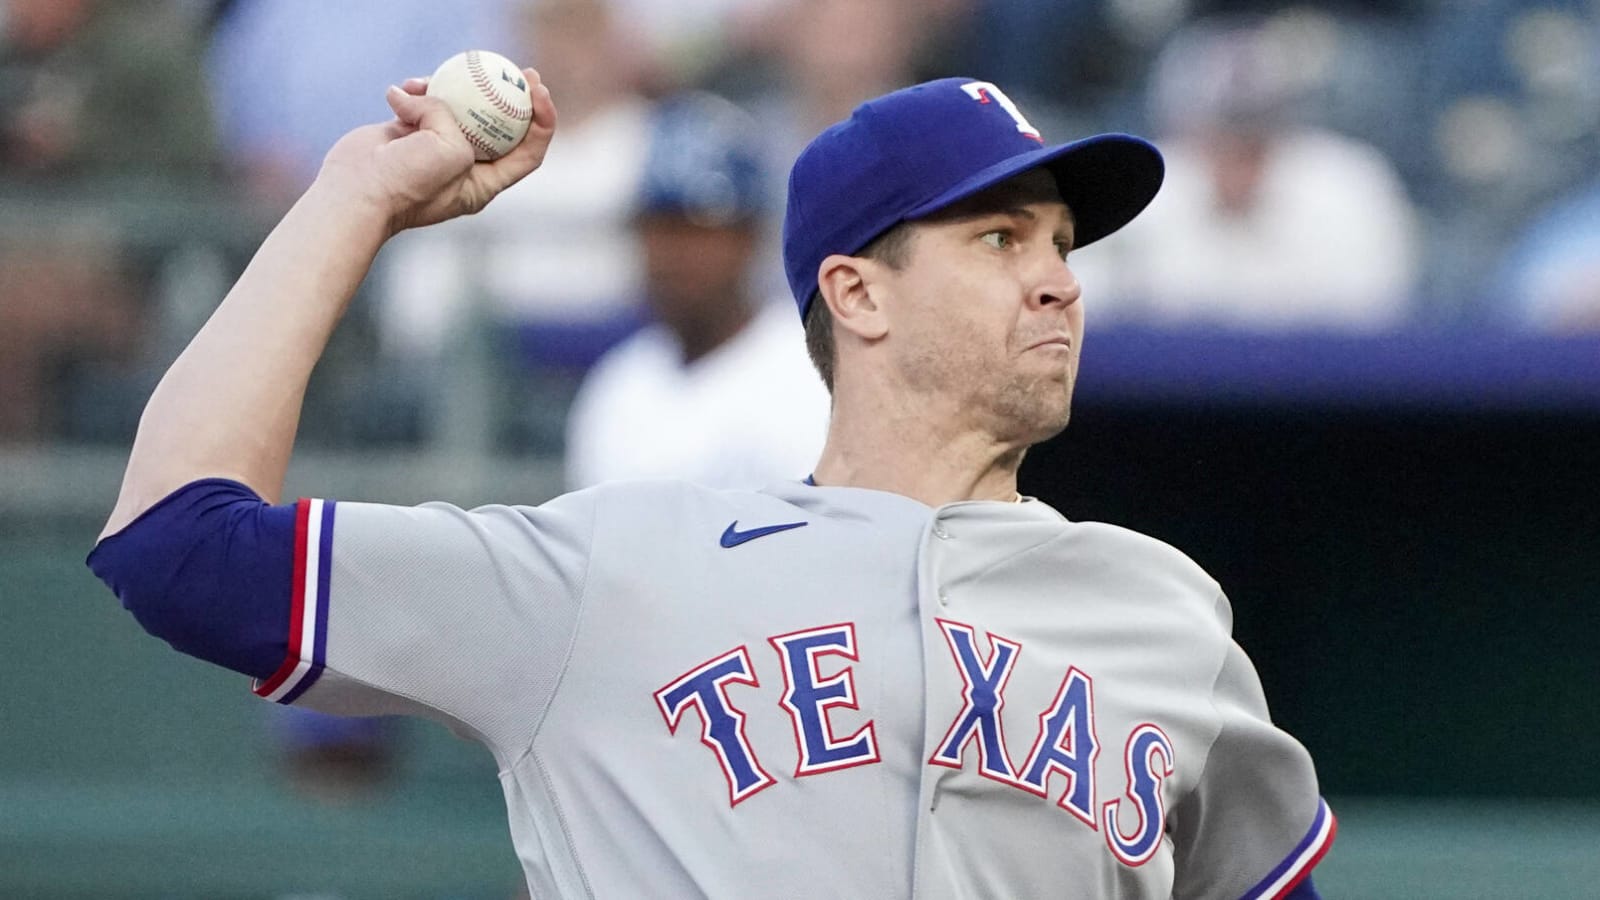 Rangers ace forced to exit no-hit bid due to injury